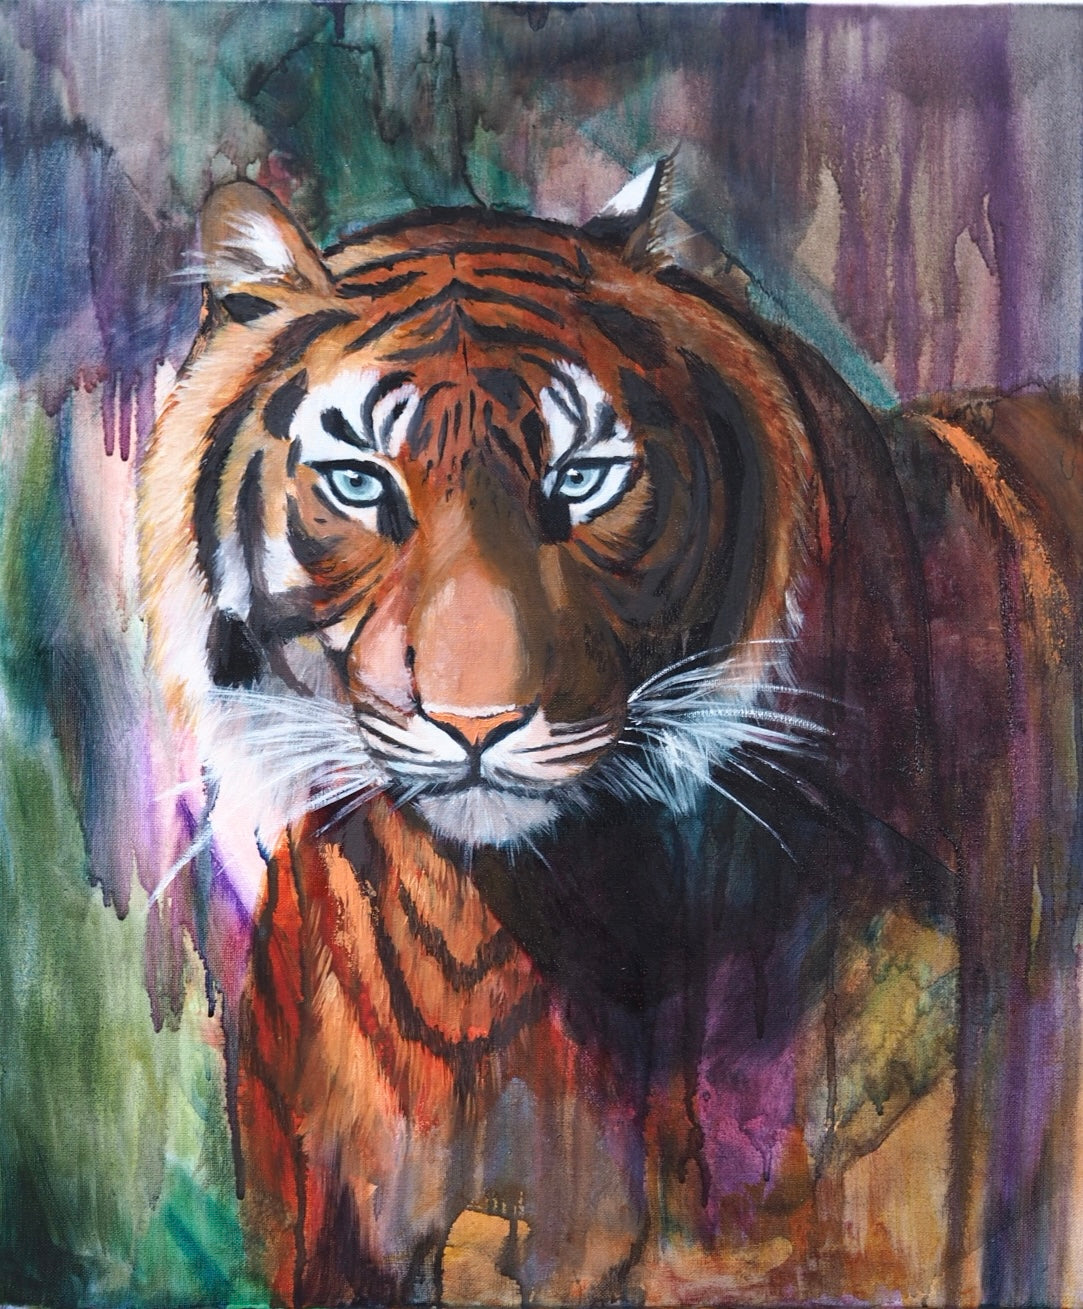 5. Painting of a tiger with dripping abstract background